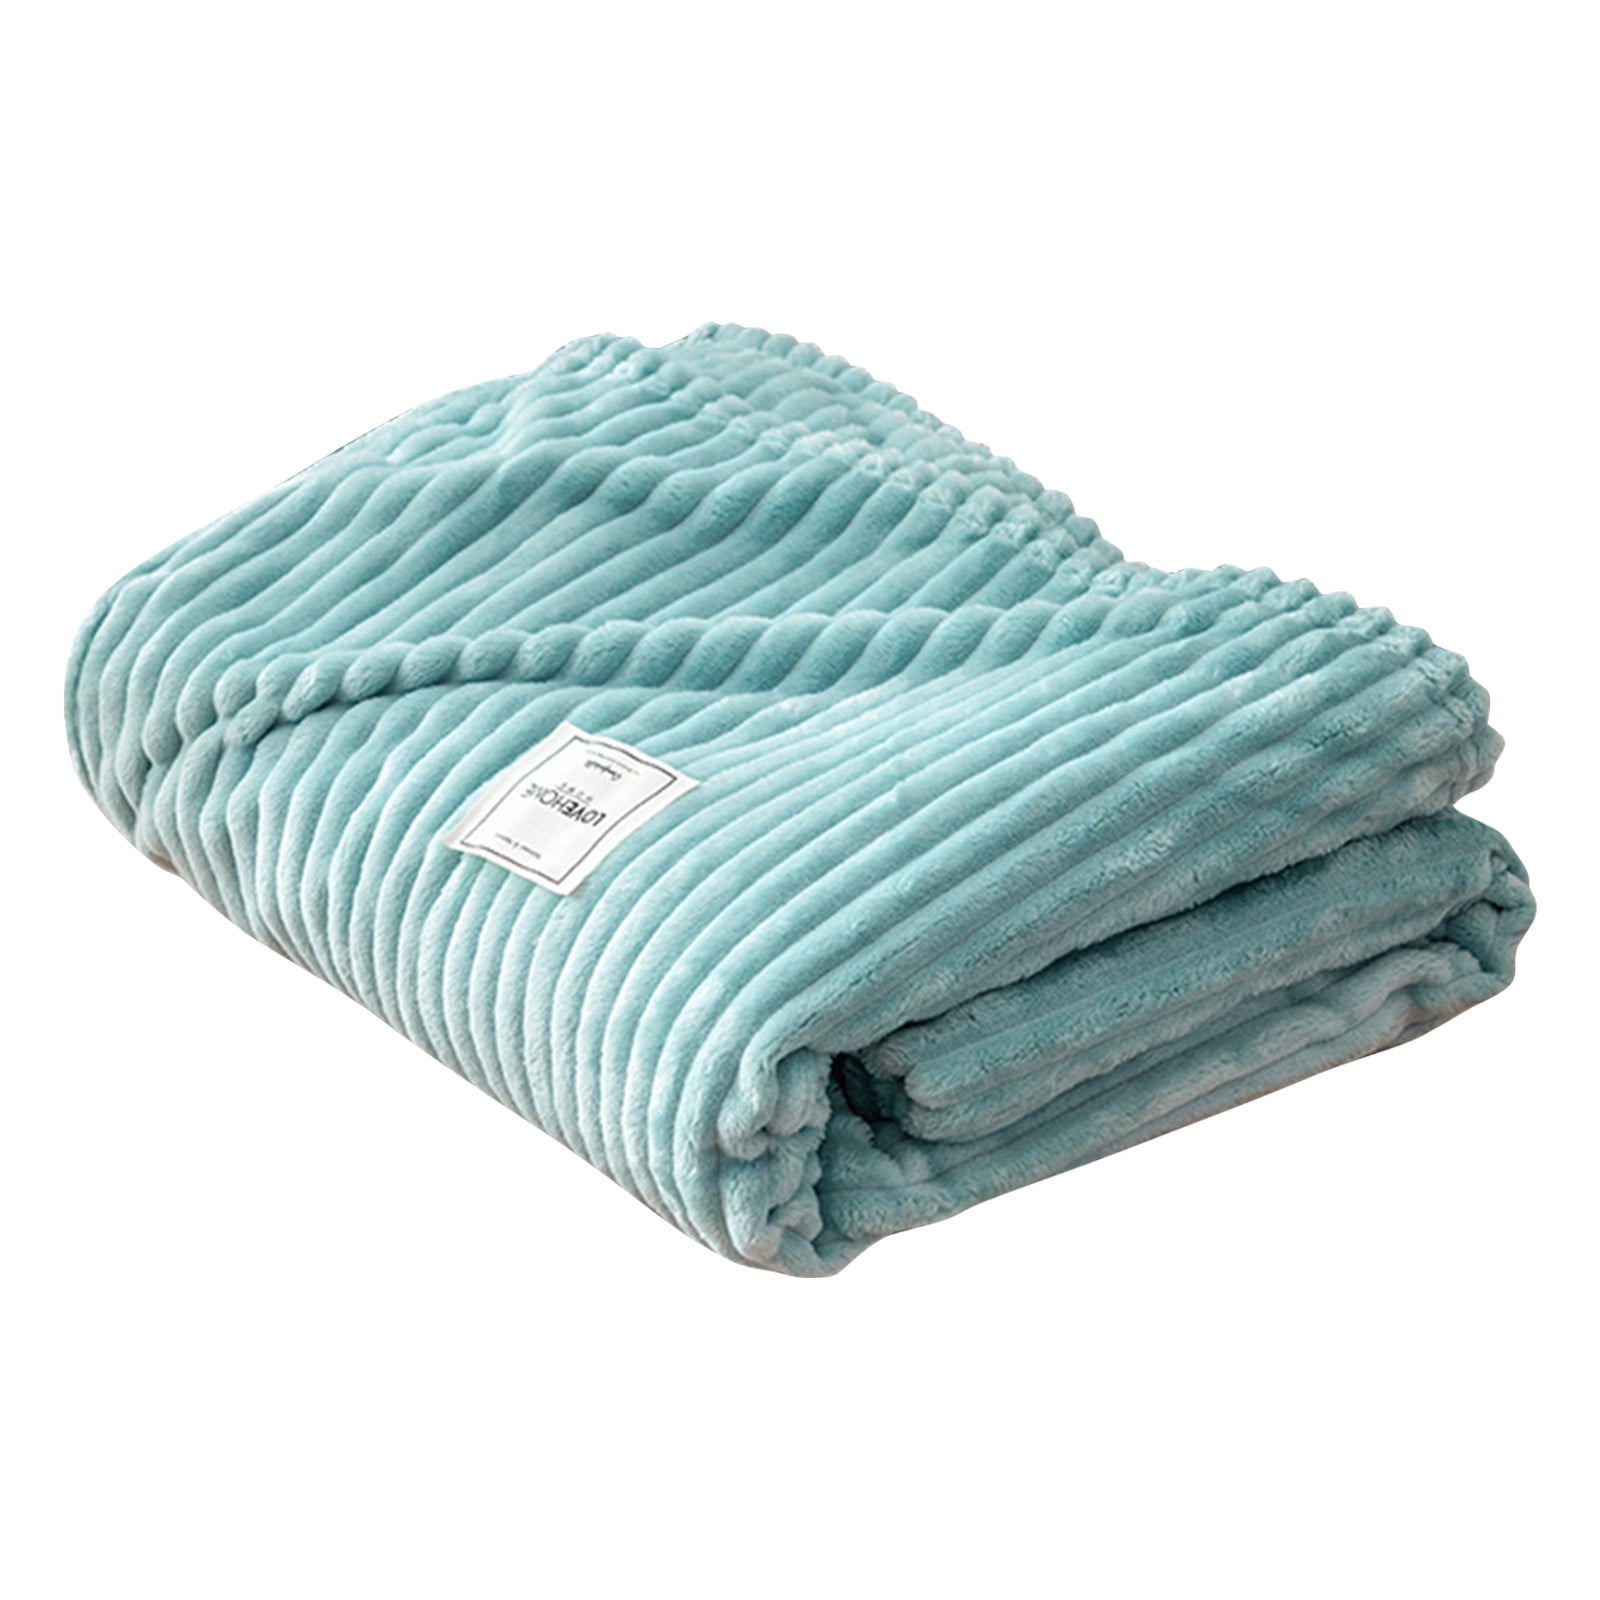 Ribbed Faux Fur Effect Throw Teal Blue Super Soft Warm Bed Blanket Cover